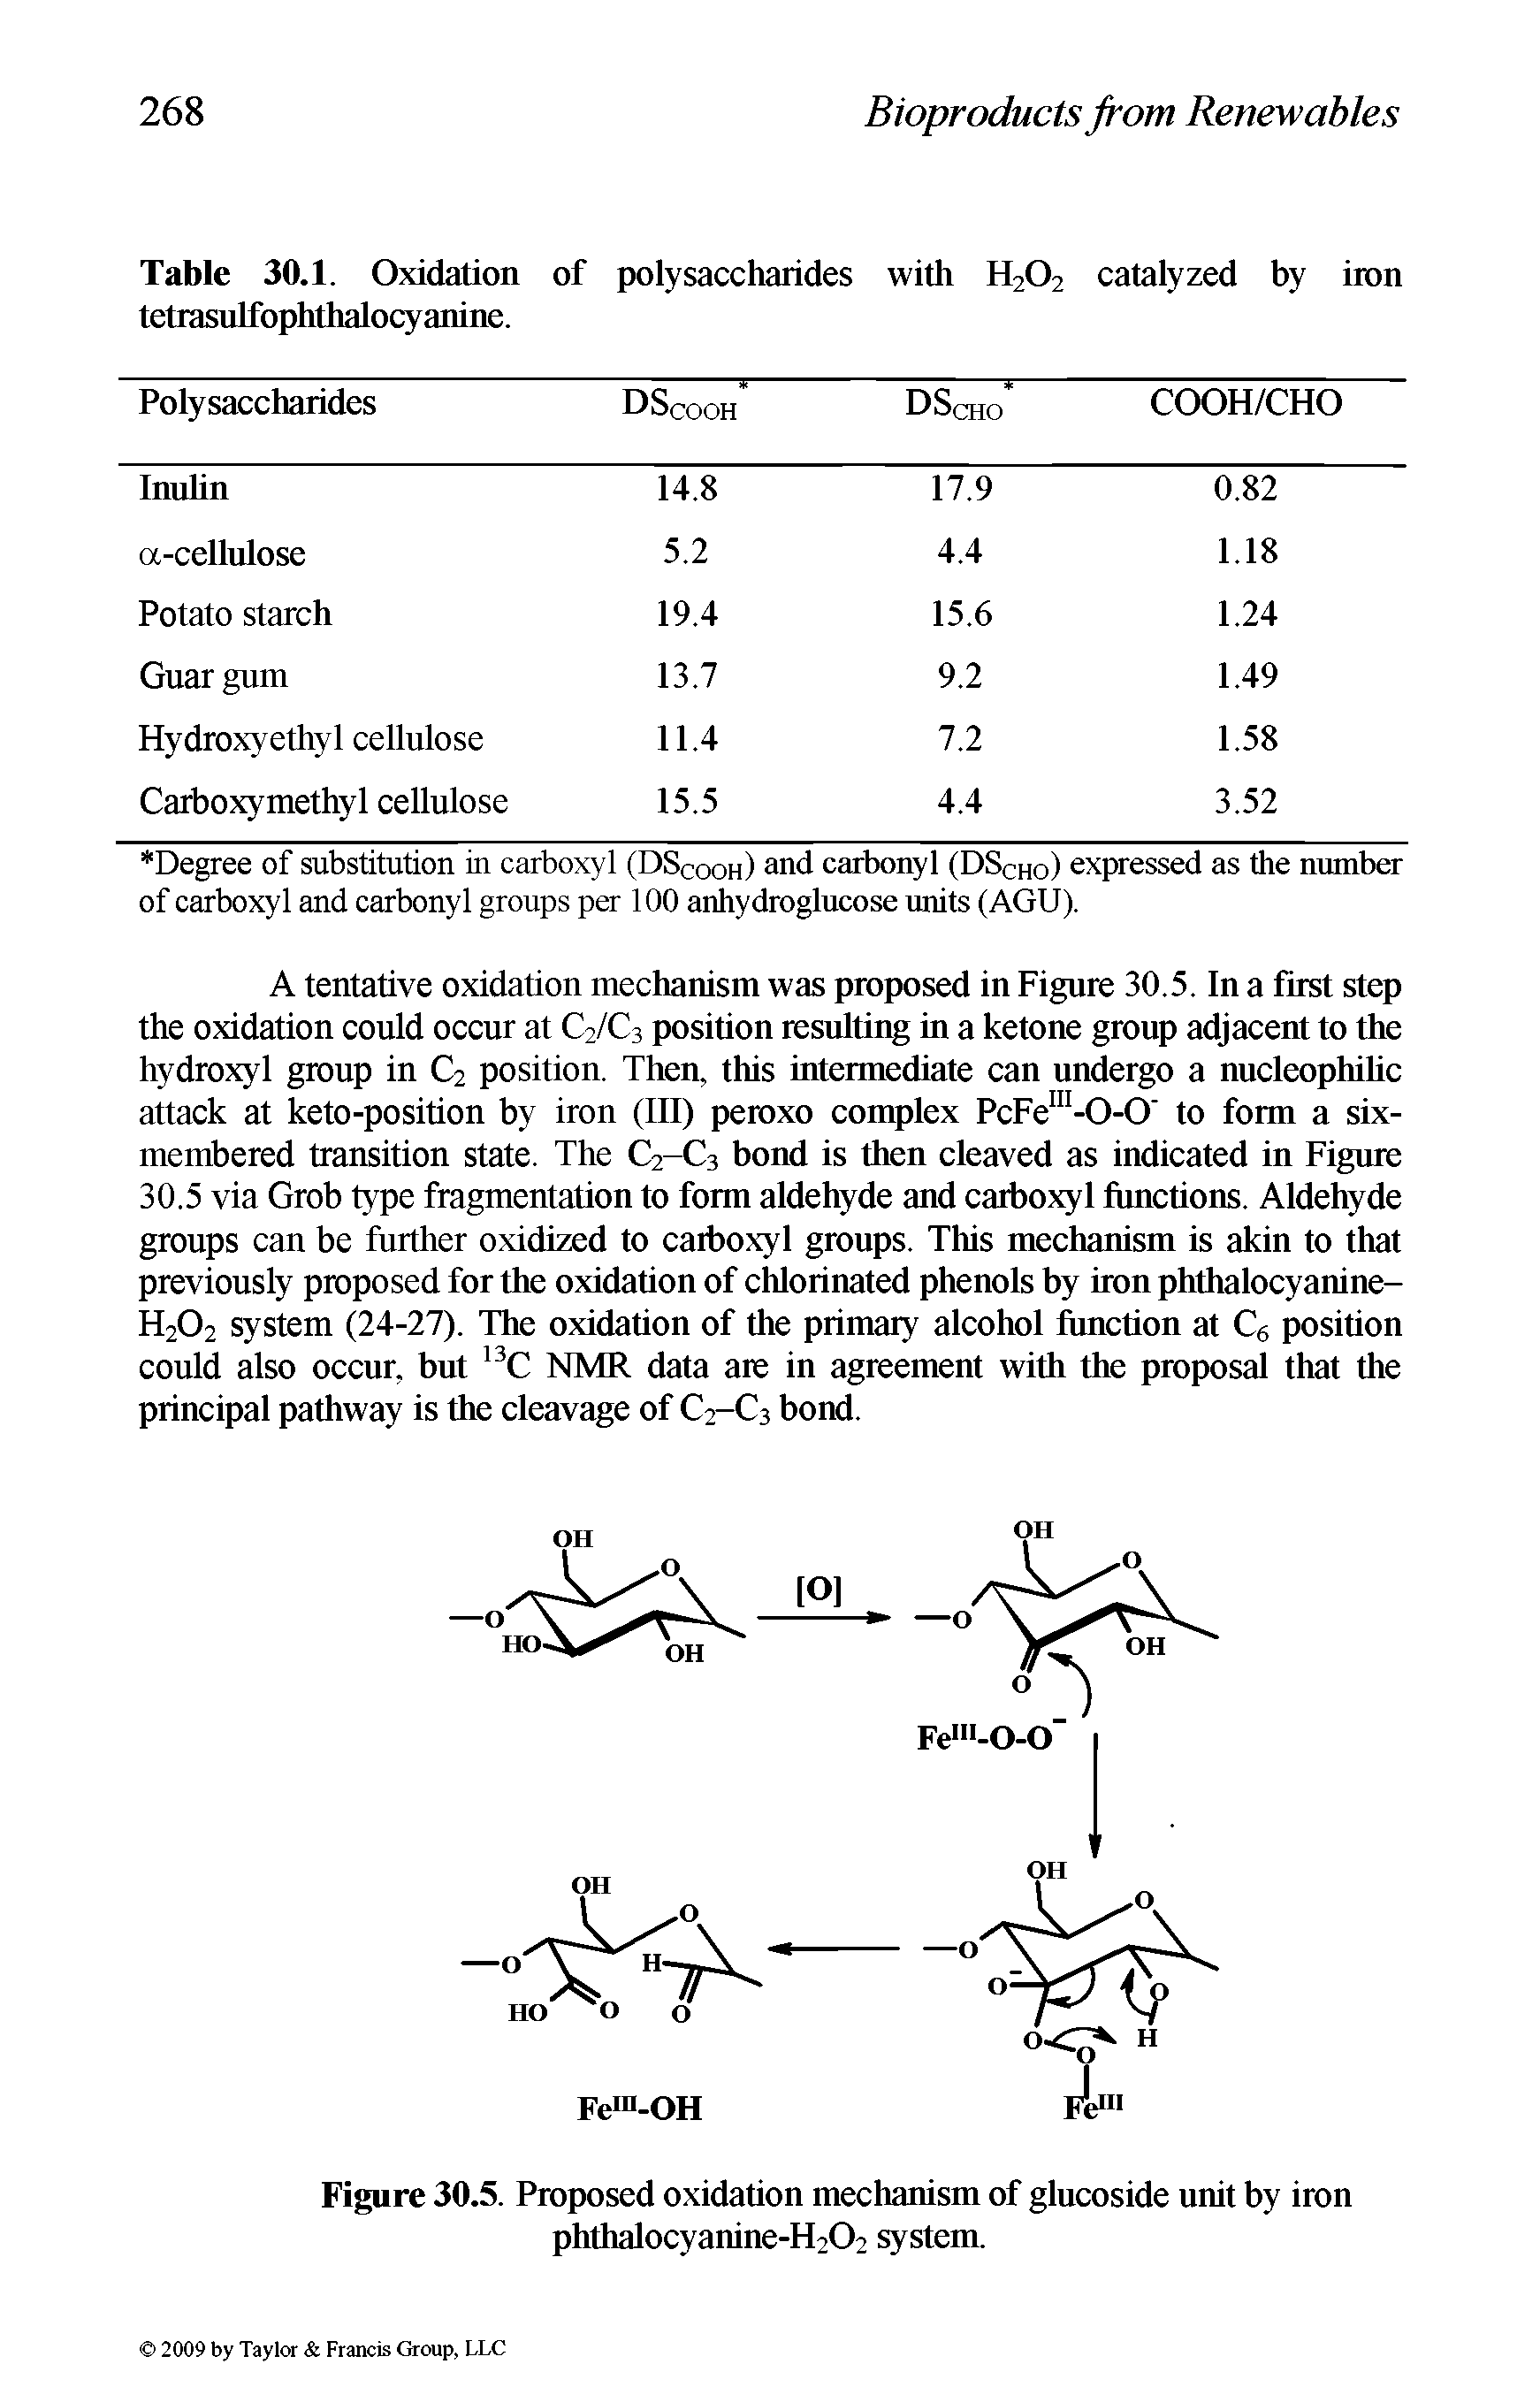 Figure 30.5. Proposed oxidation mechanism of glucoside unit by iron phthalocyanine-H202 system.